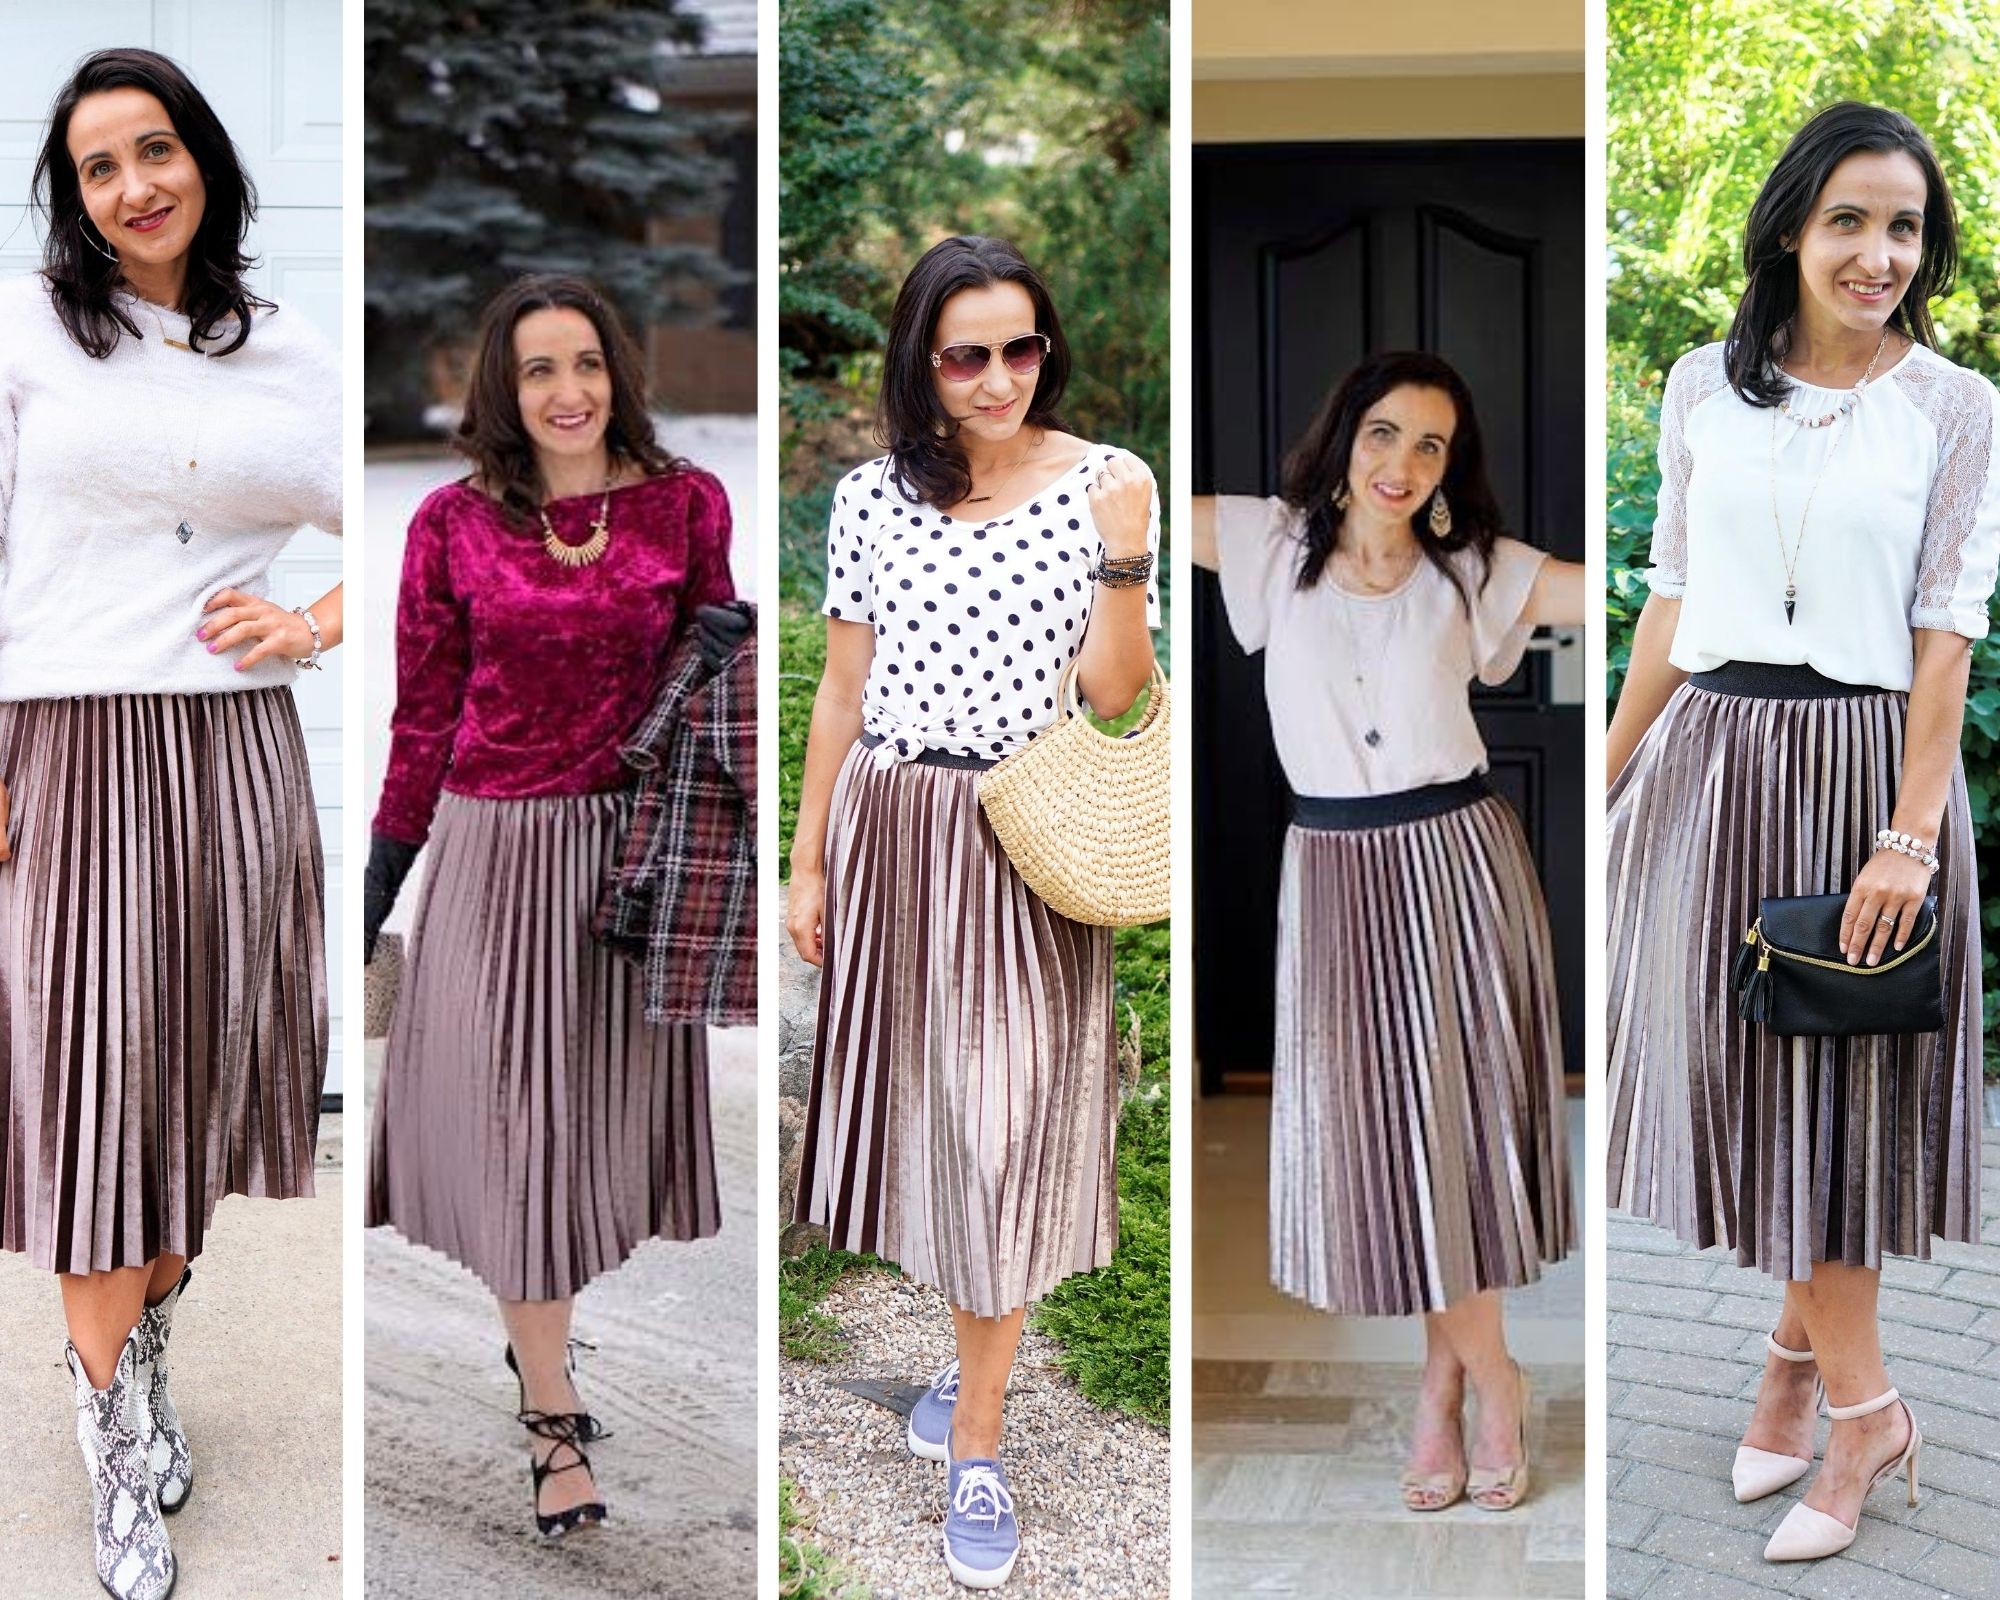 Bo's Bodacious Blog: Pretty Pink Pleated Skirt Five Ways & a Link Up